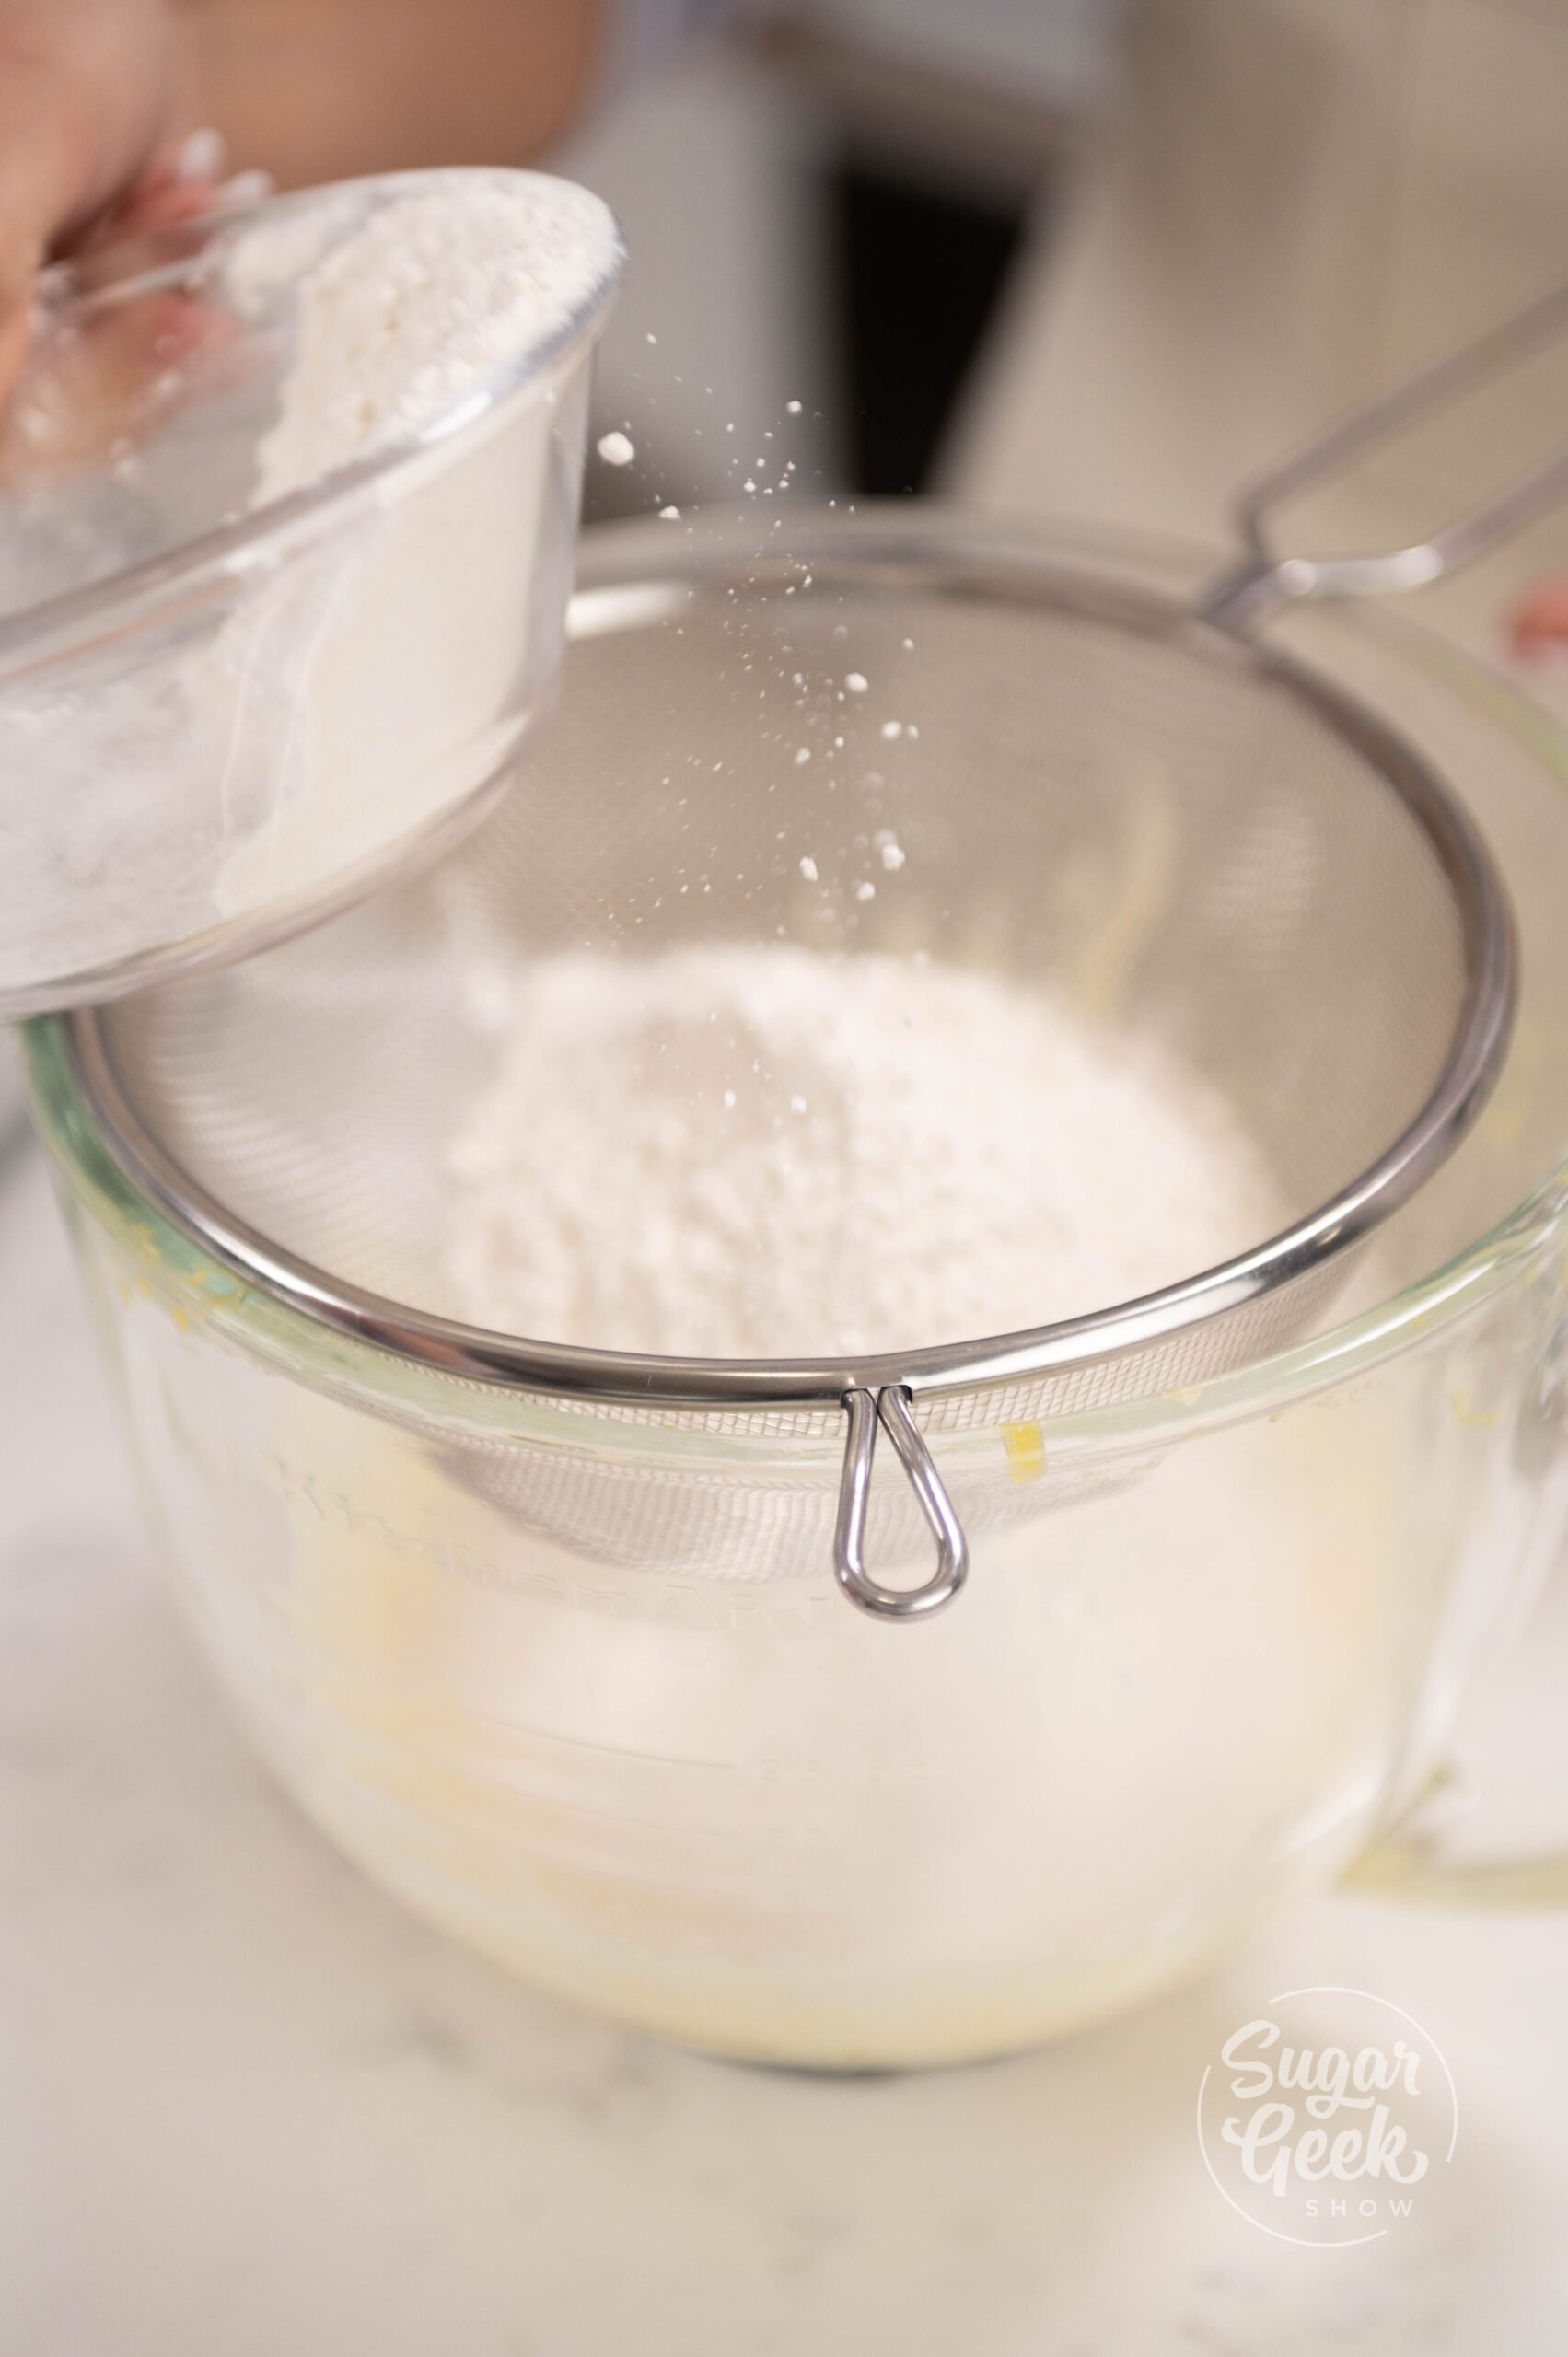 hand pouring bowl of flour over sifter